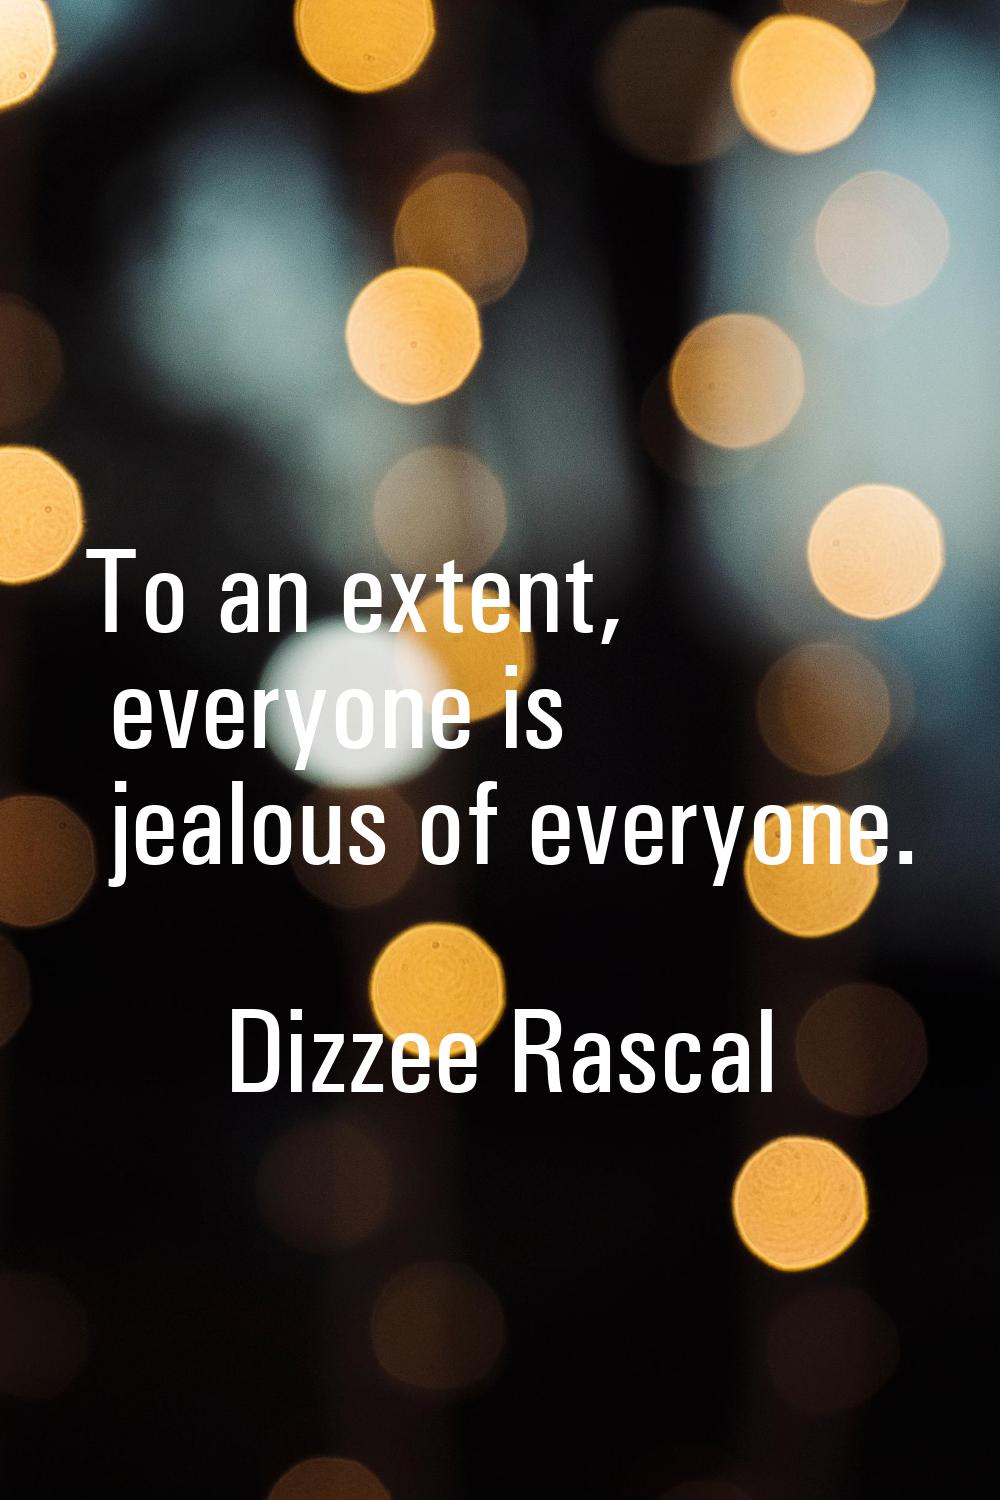 To an extent, everyone is jealous of everyone.